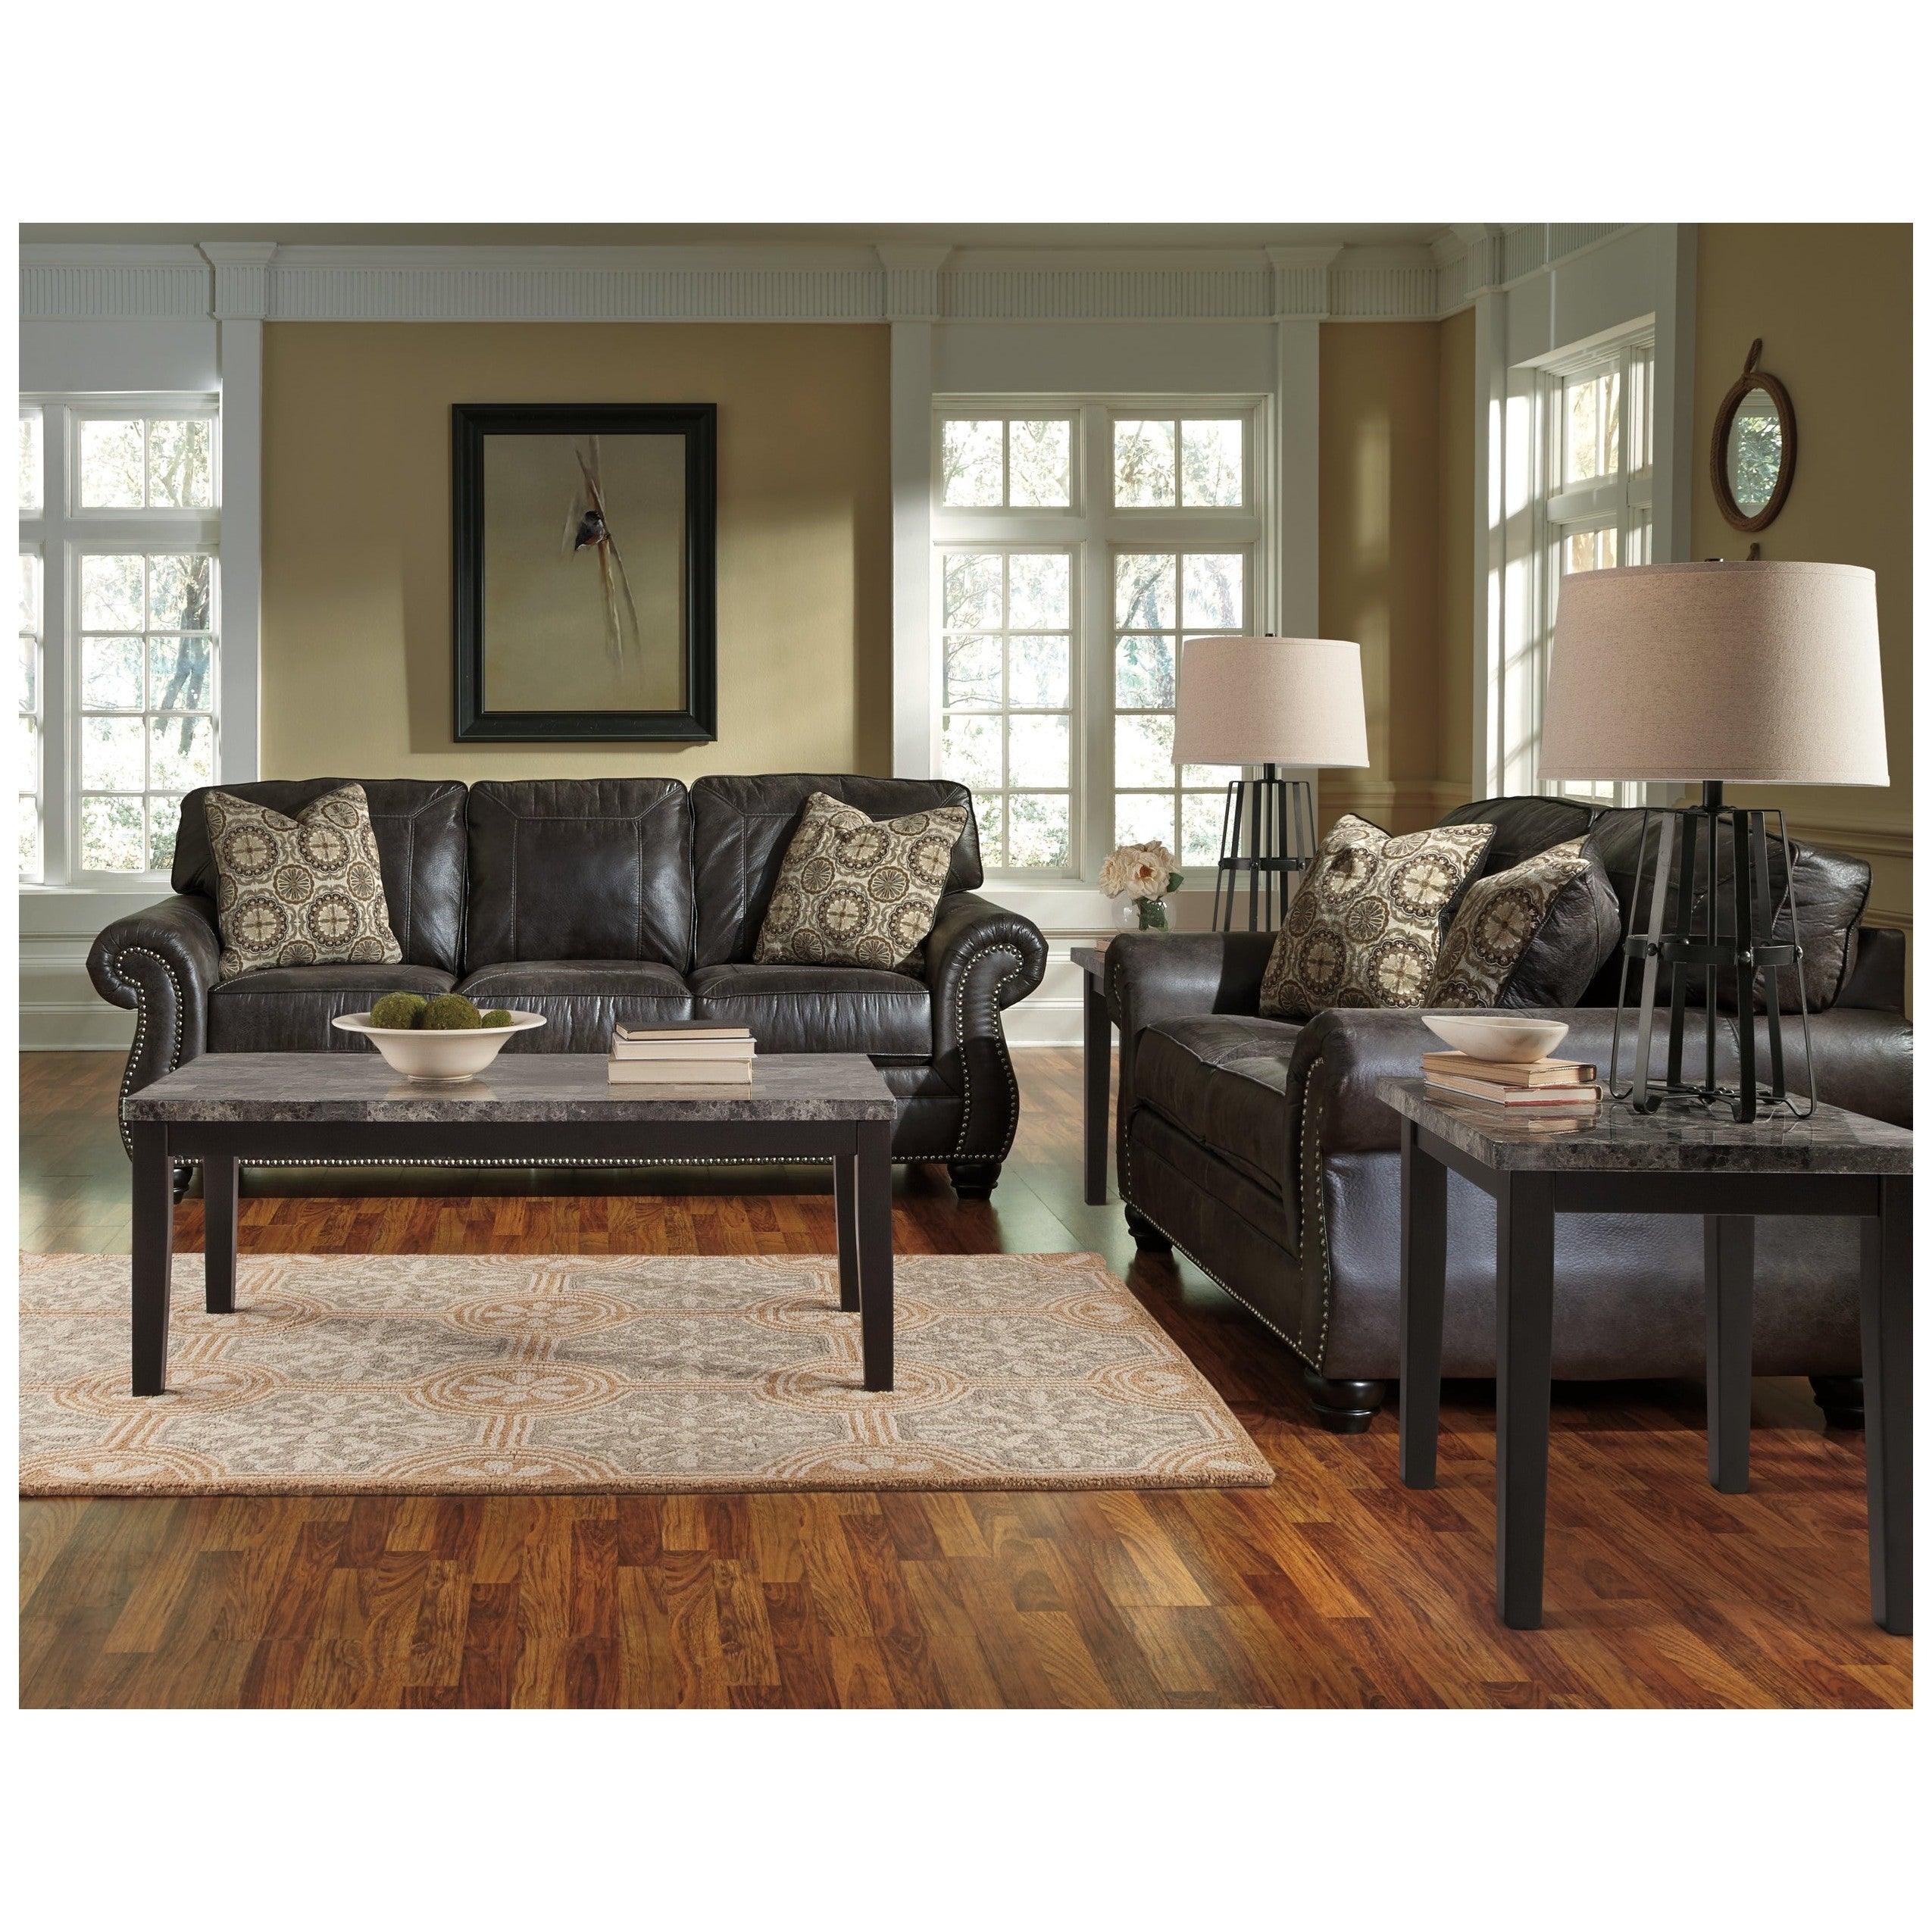 Benchcraft Breville Sofa And Loveseat